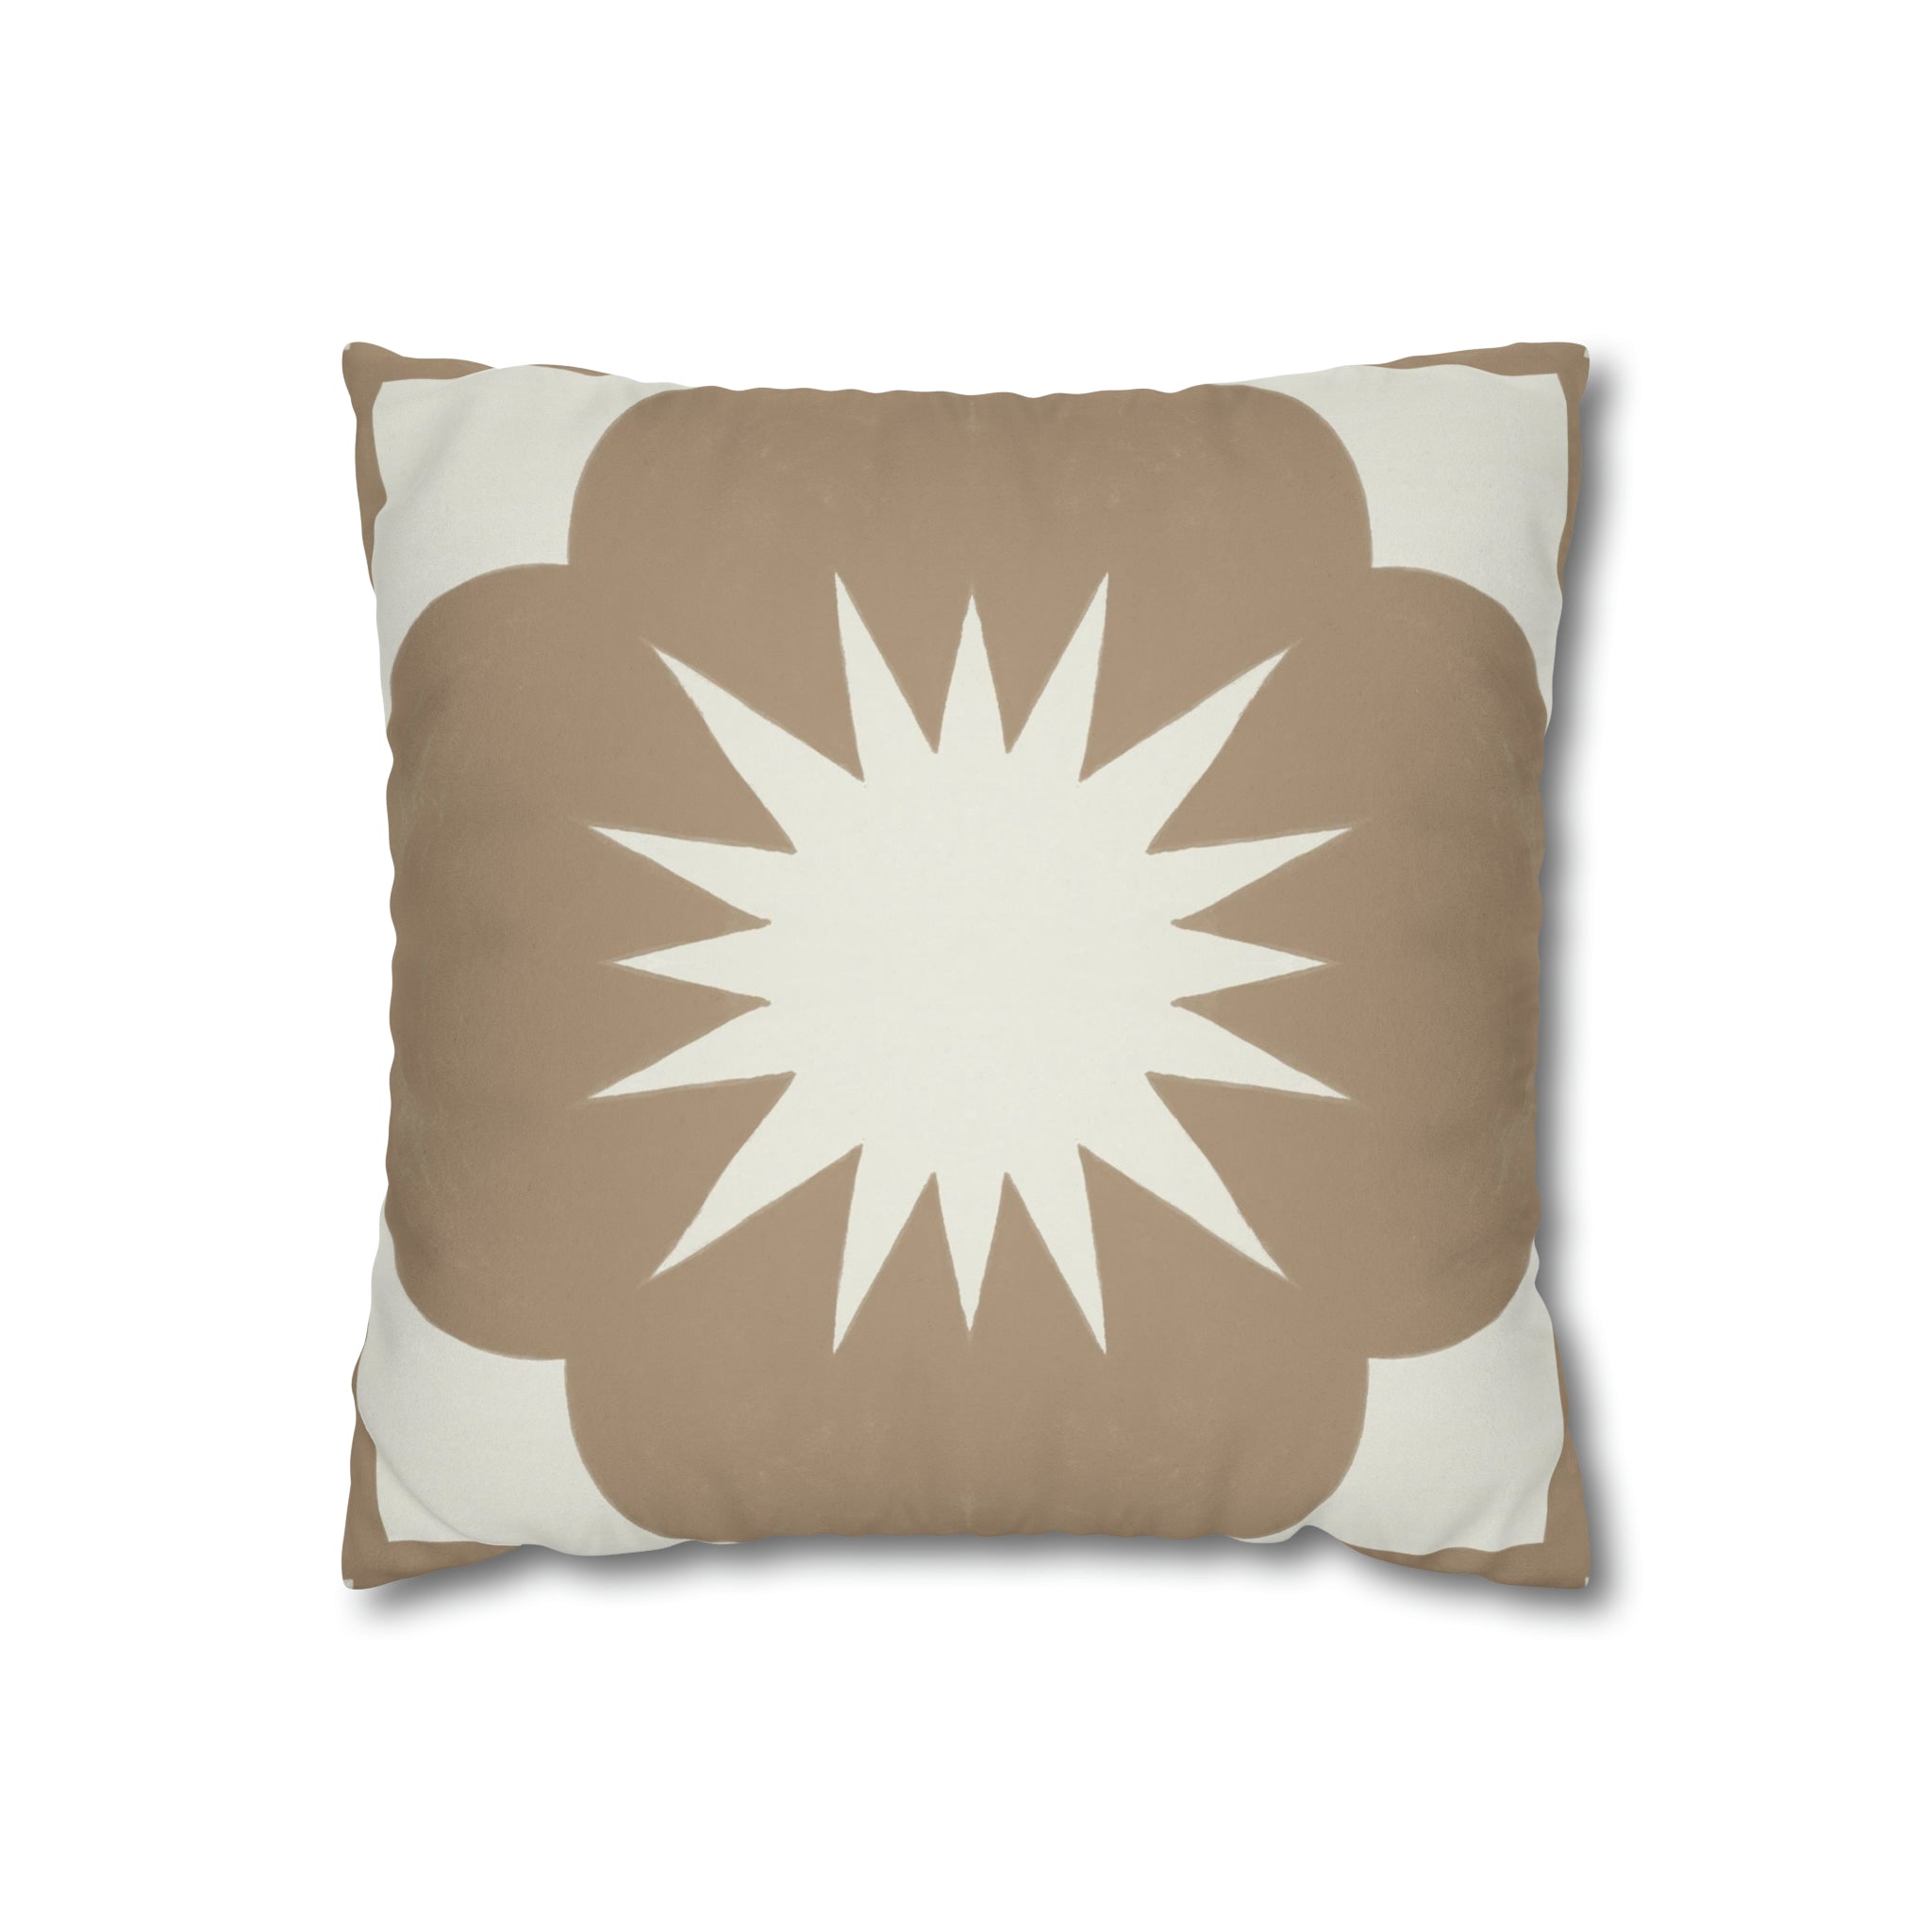 Toledo Fawn Microsuede Square Pillow Cover